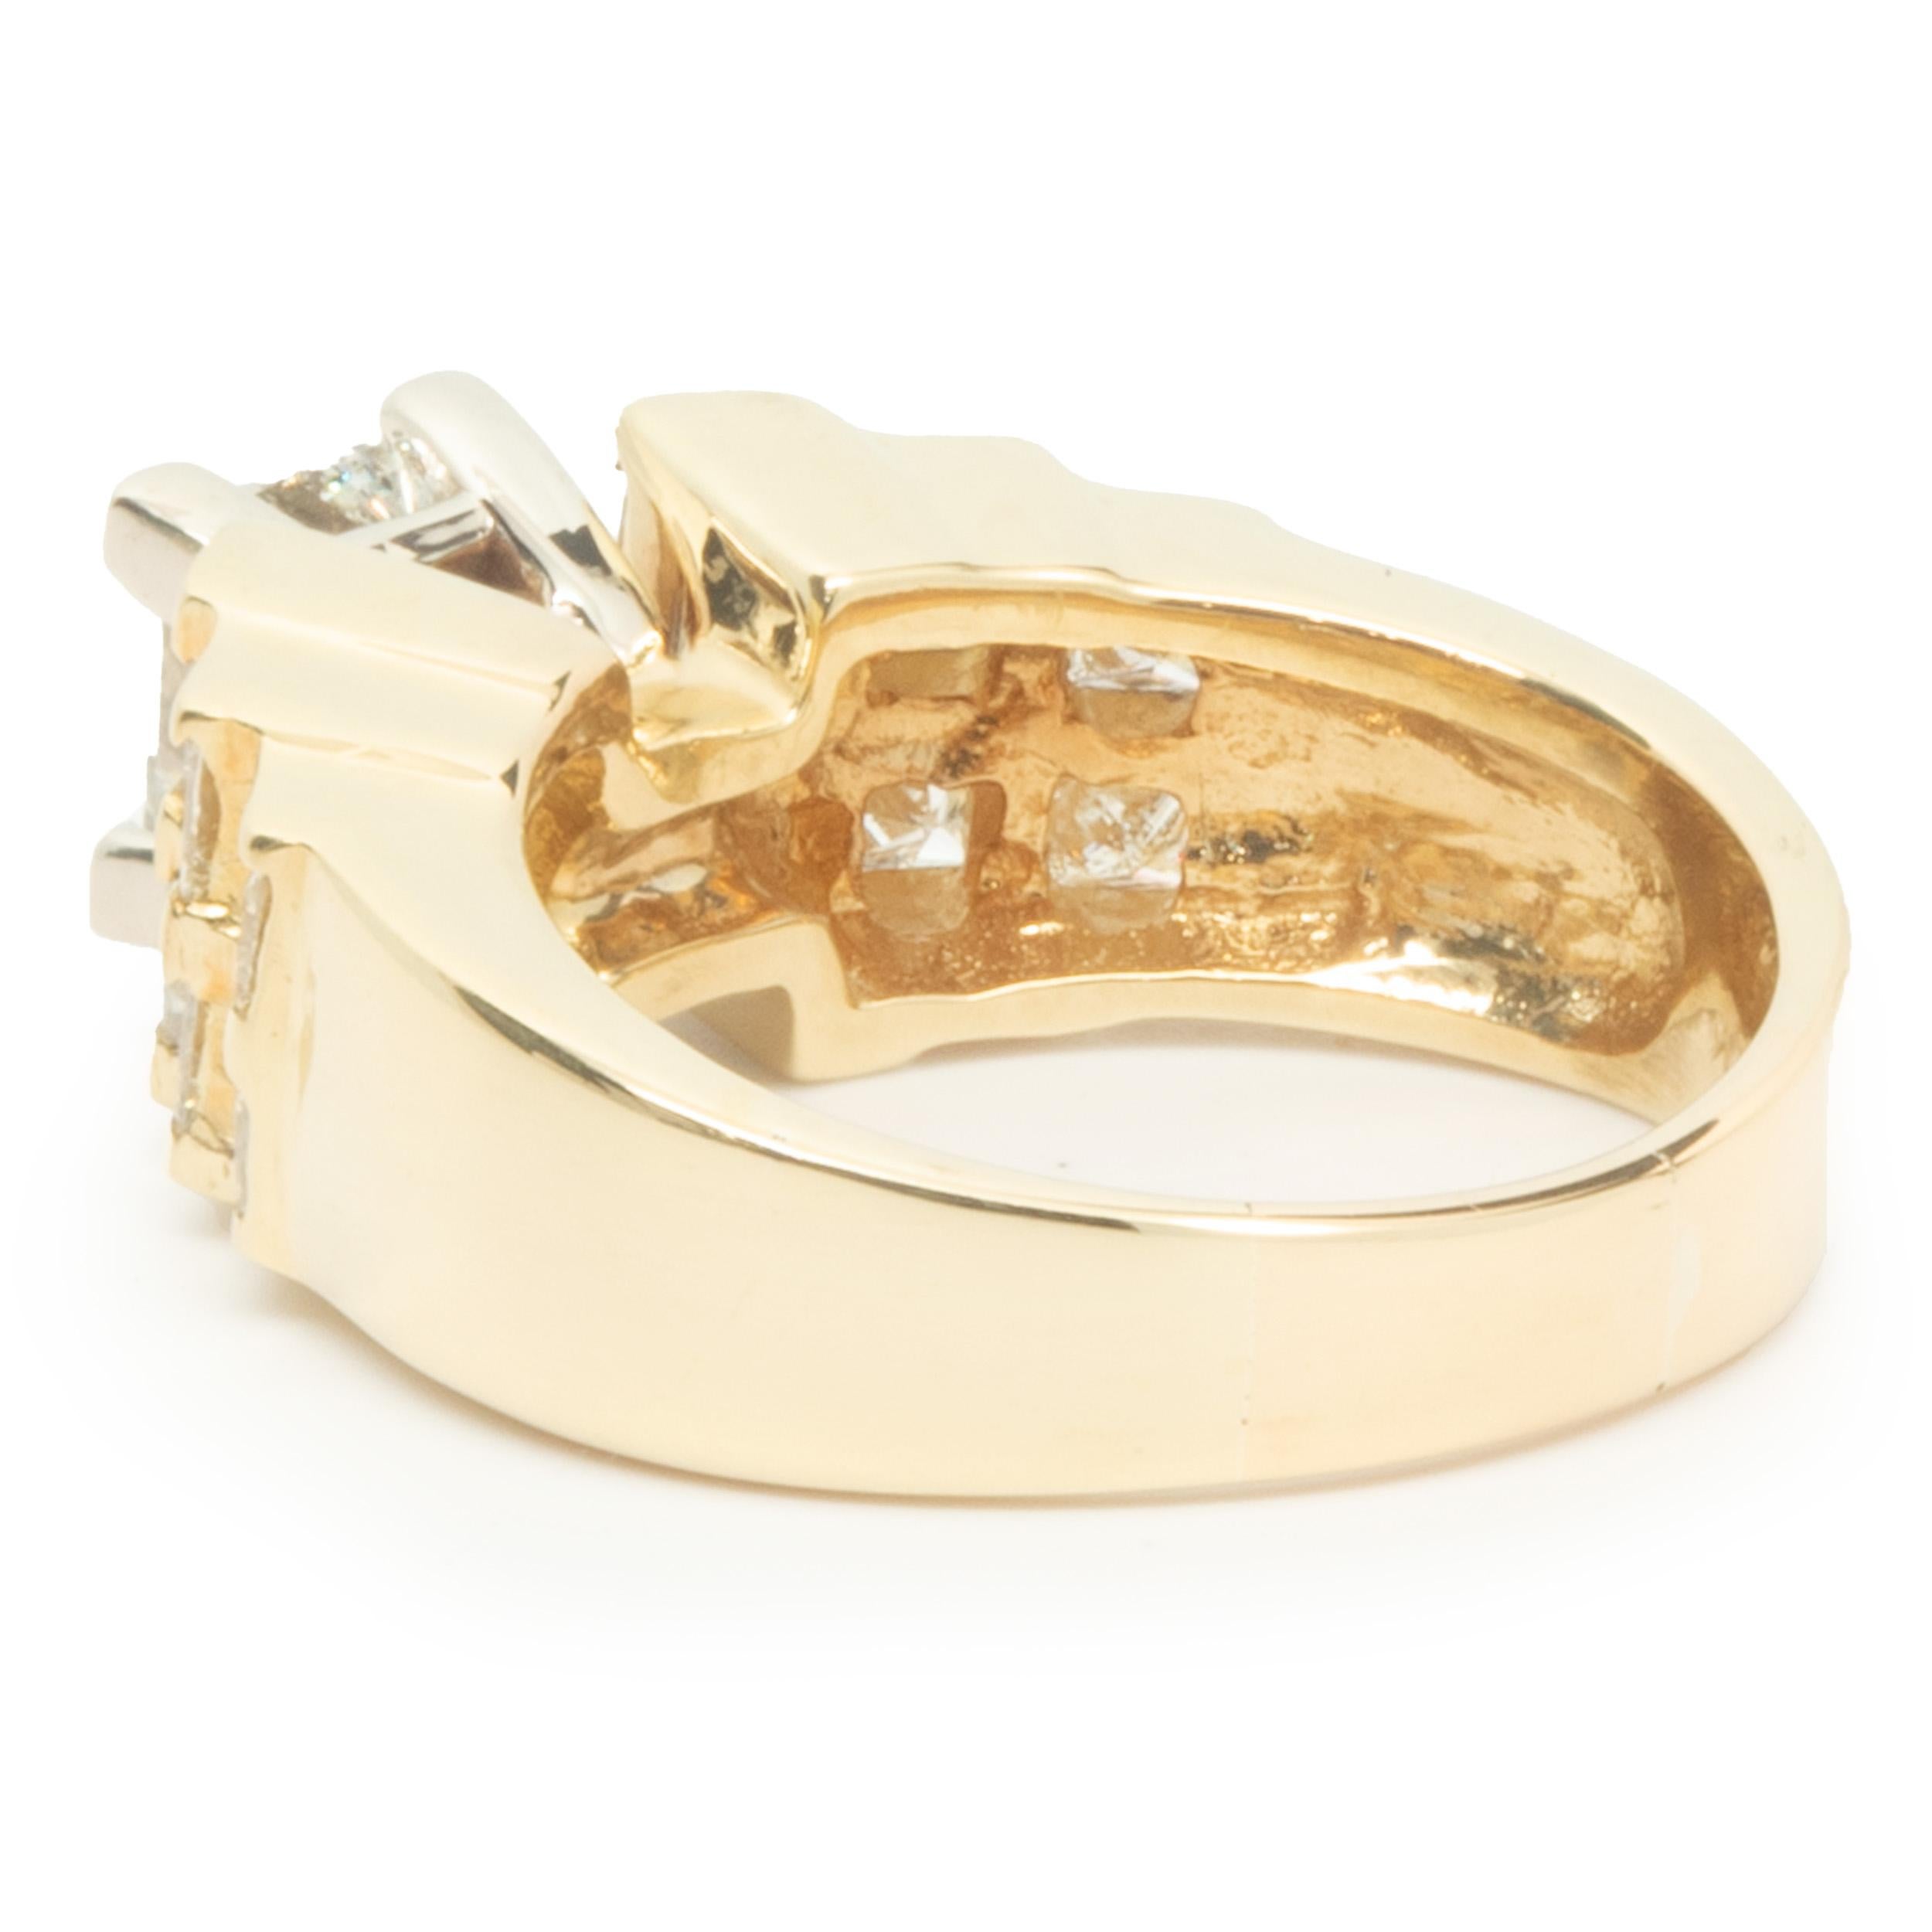 18 Karat Yellow Gold Princess Cut Diamond Engagement Ring In Excellent Condition For Sale In Scottsdale, AZ